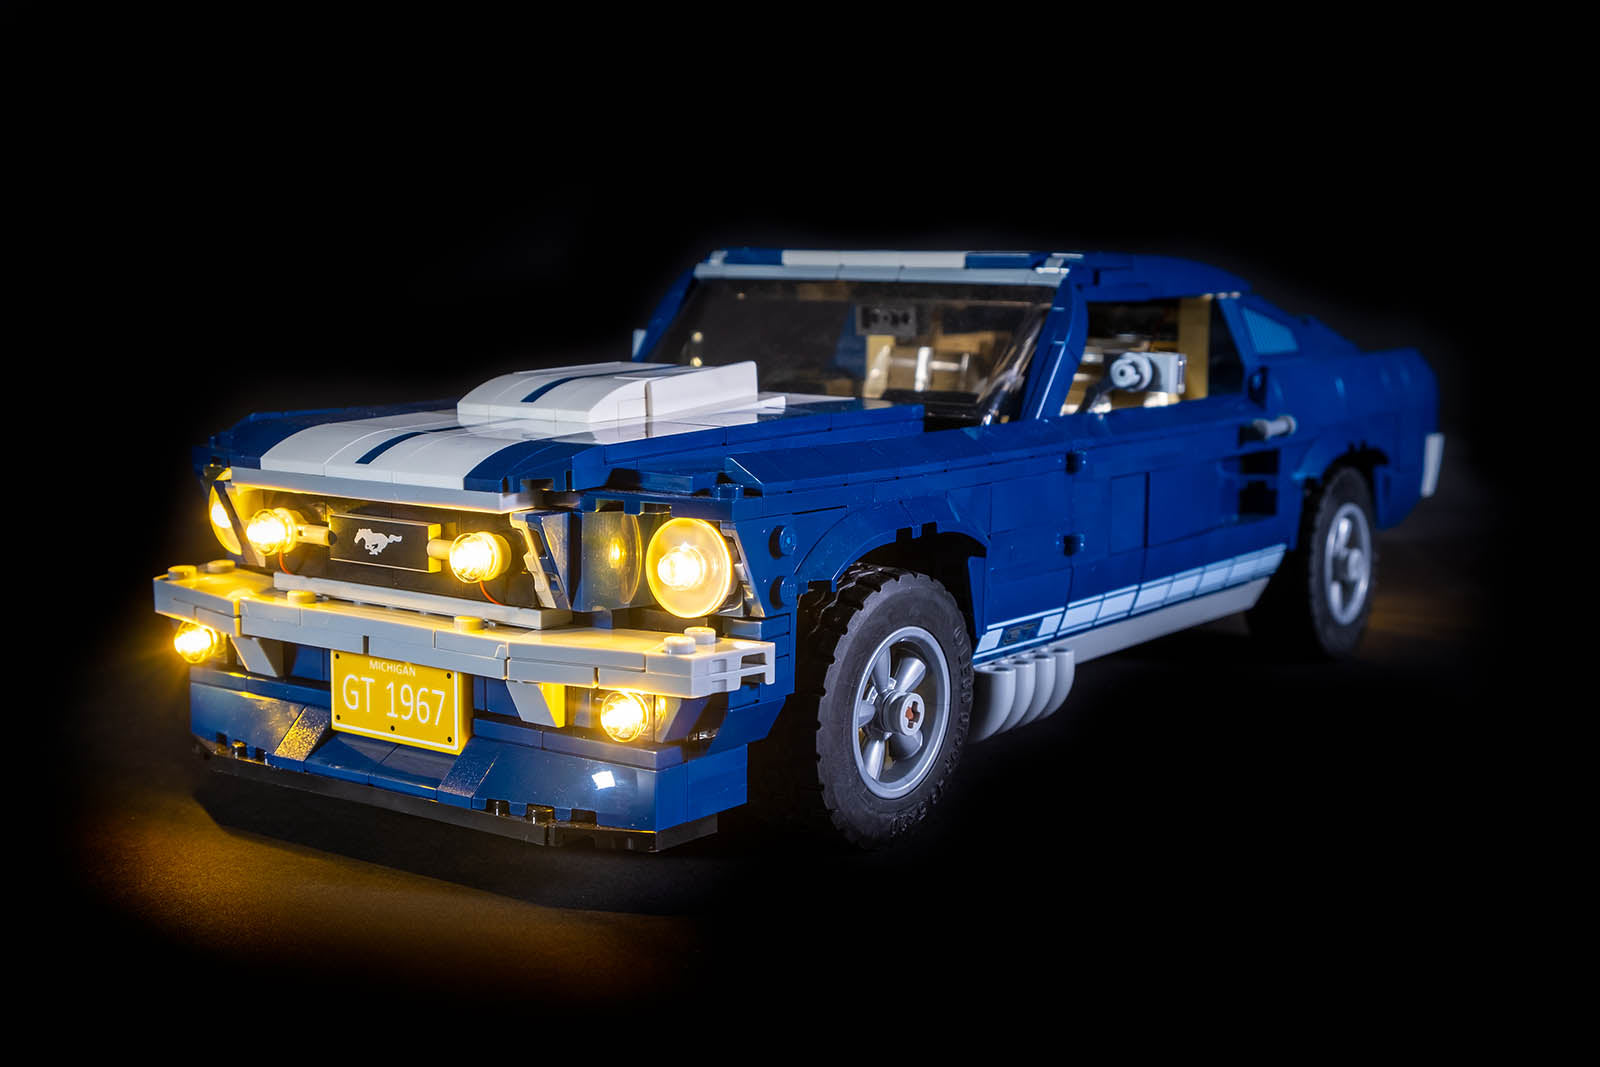 Eight of the nicest details in the Lego Ford Mustang GT